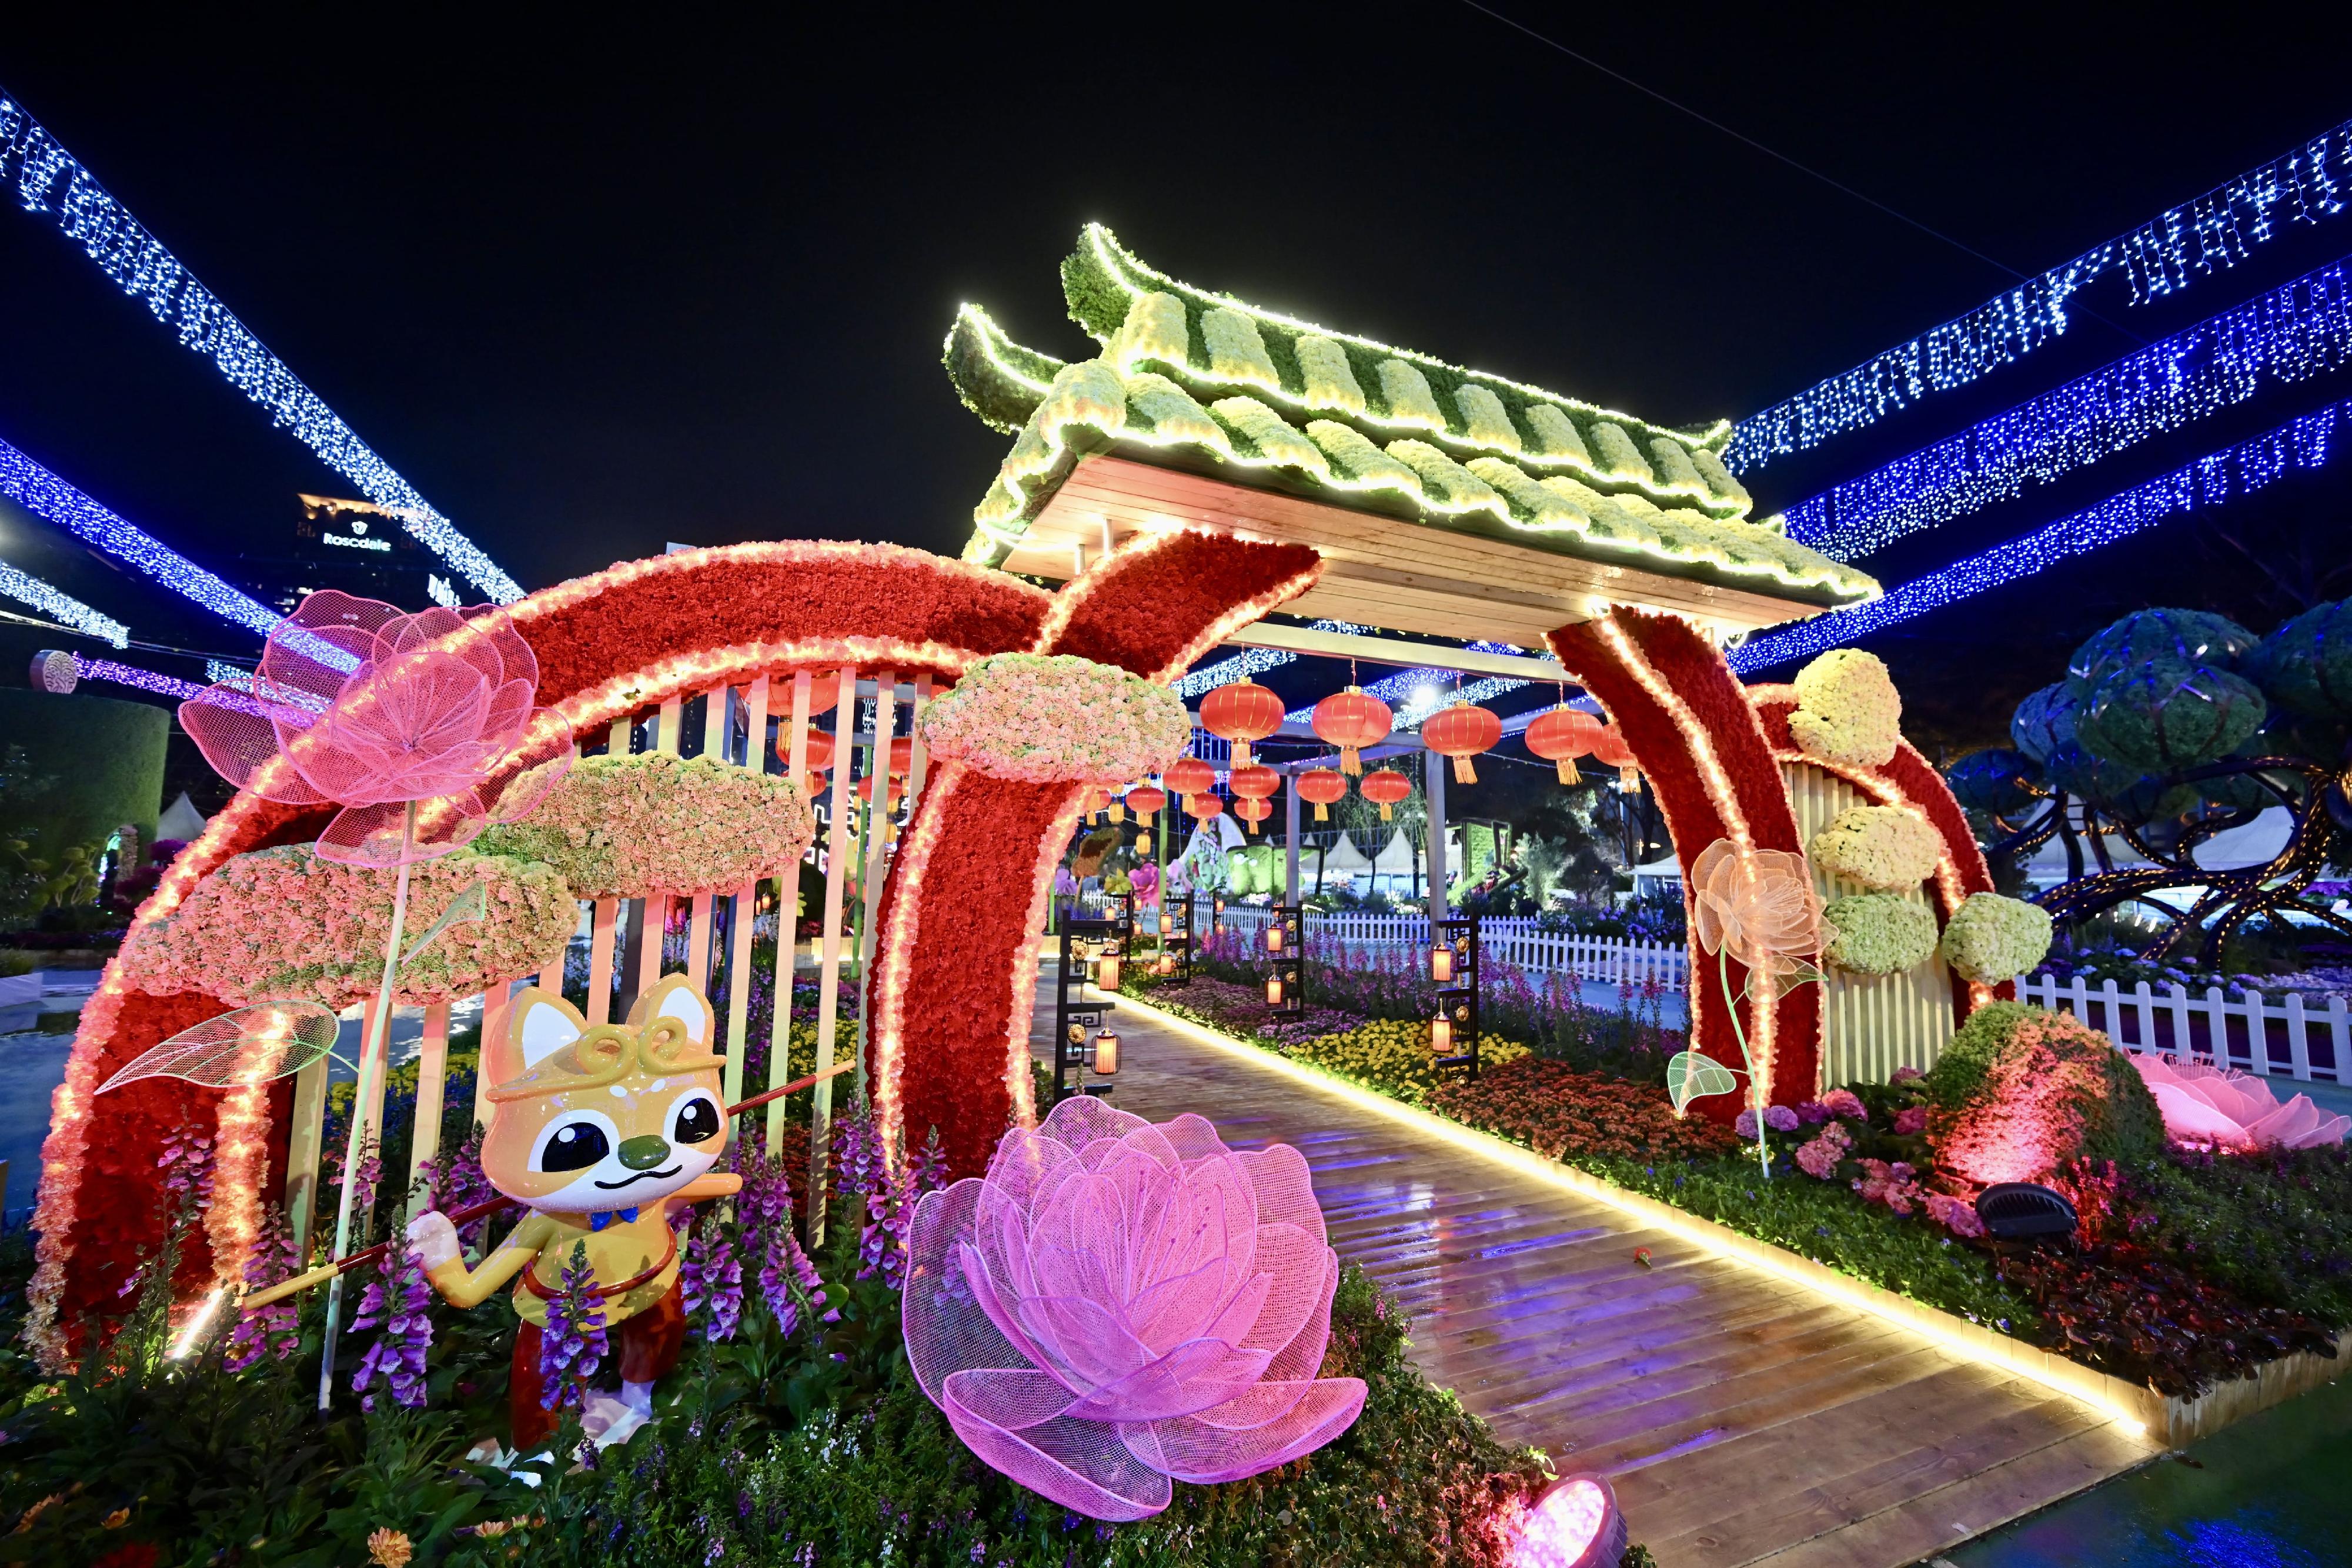 The Hong Kong Flower Show 2024 will be held at Victoria Park from tomorrow (March 15) until March 24. This year's flower show features "Floral Joy Around Town" as the main theme and angelonia as the theme flower. At night, the large-scale landscape displays have enhanced lighting effects to provide visitors with a different visual experience. Photo shows the display themed on The Journey to the West.
